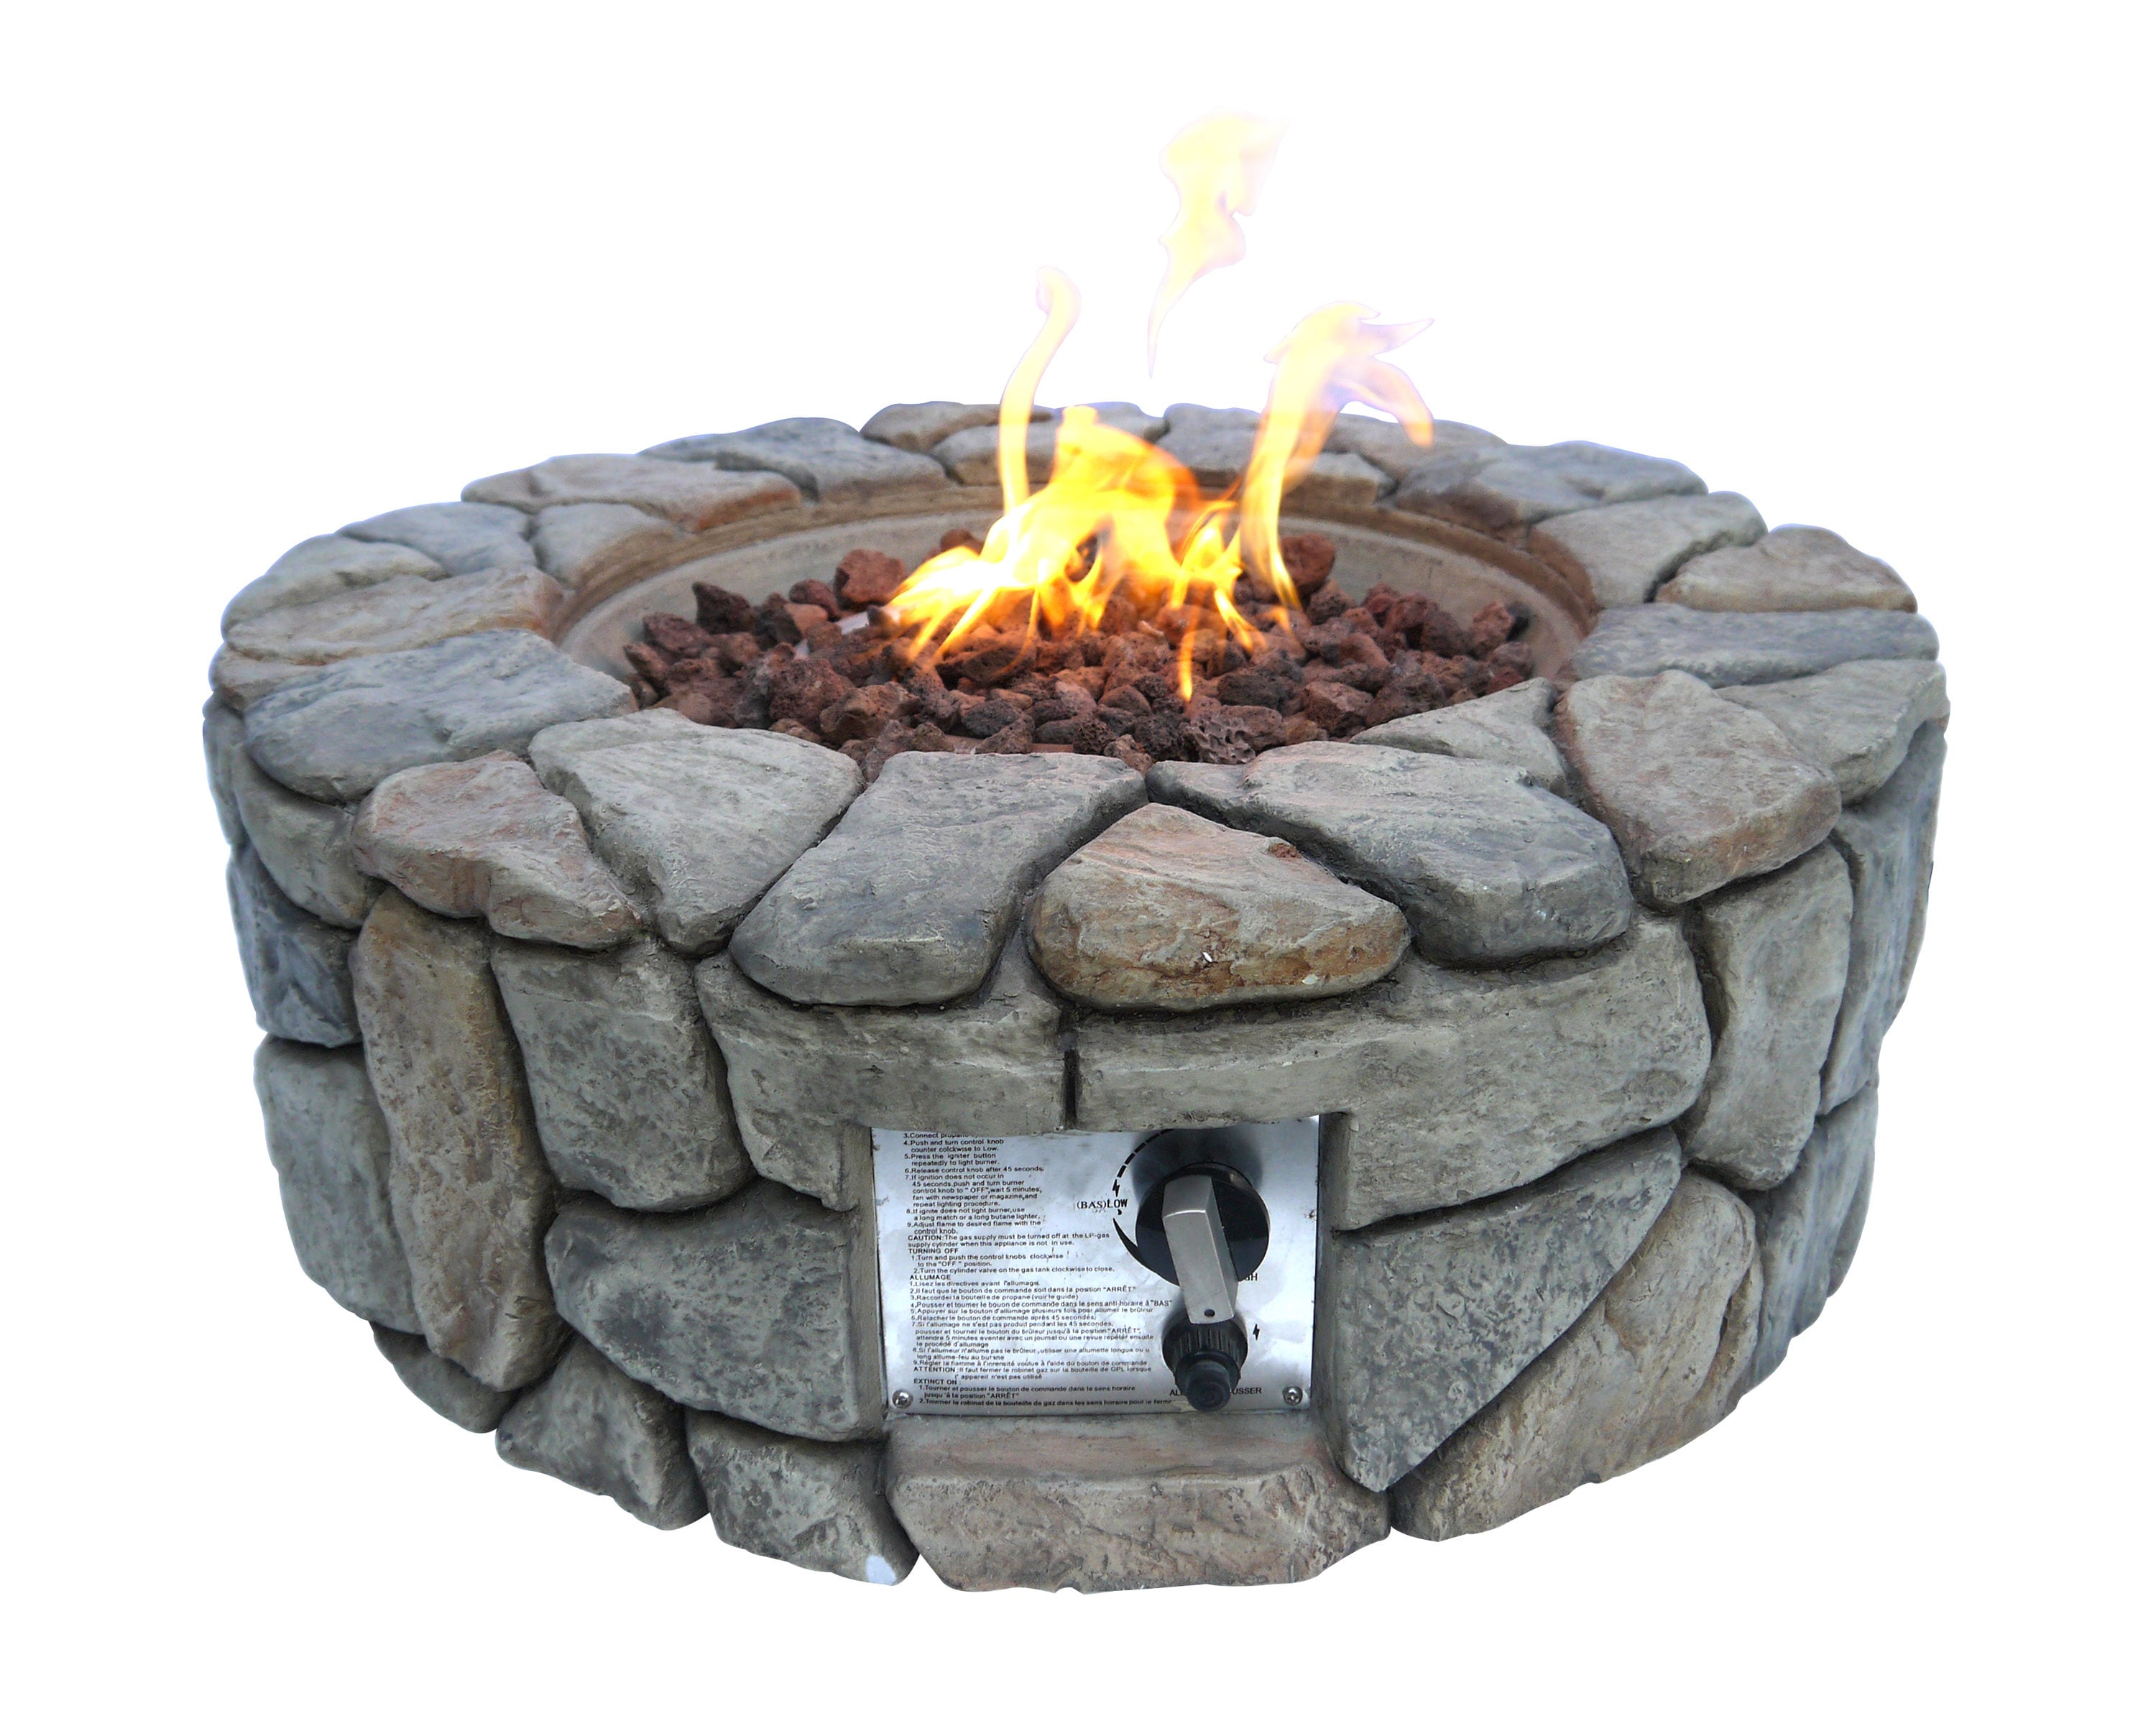 Concrete Propane Gas Fire Pit, How Many Btu Do I Need For A Fire Pit